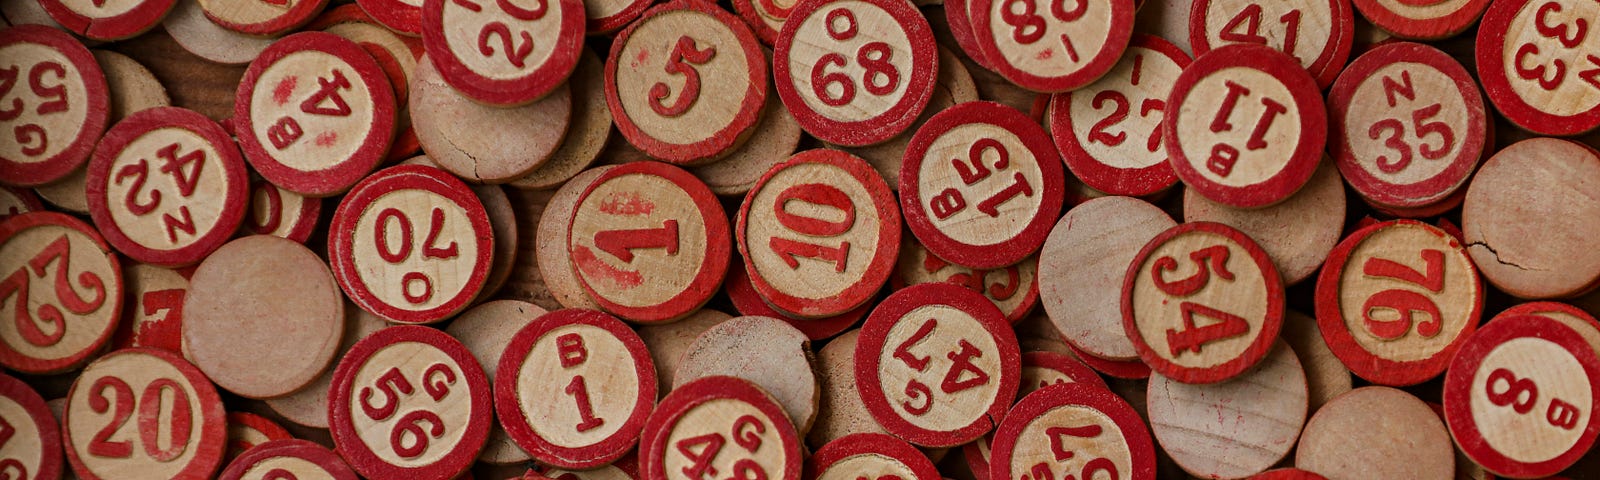 wooden bingo markers with red rims and numbers